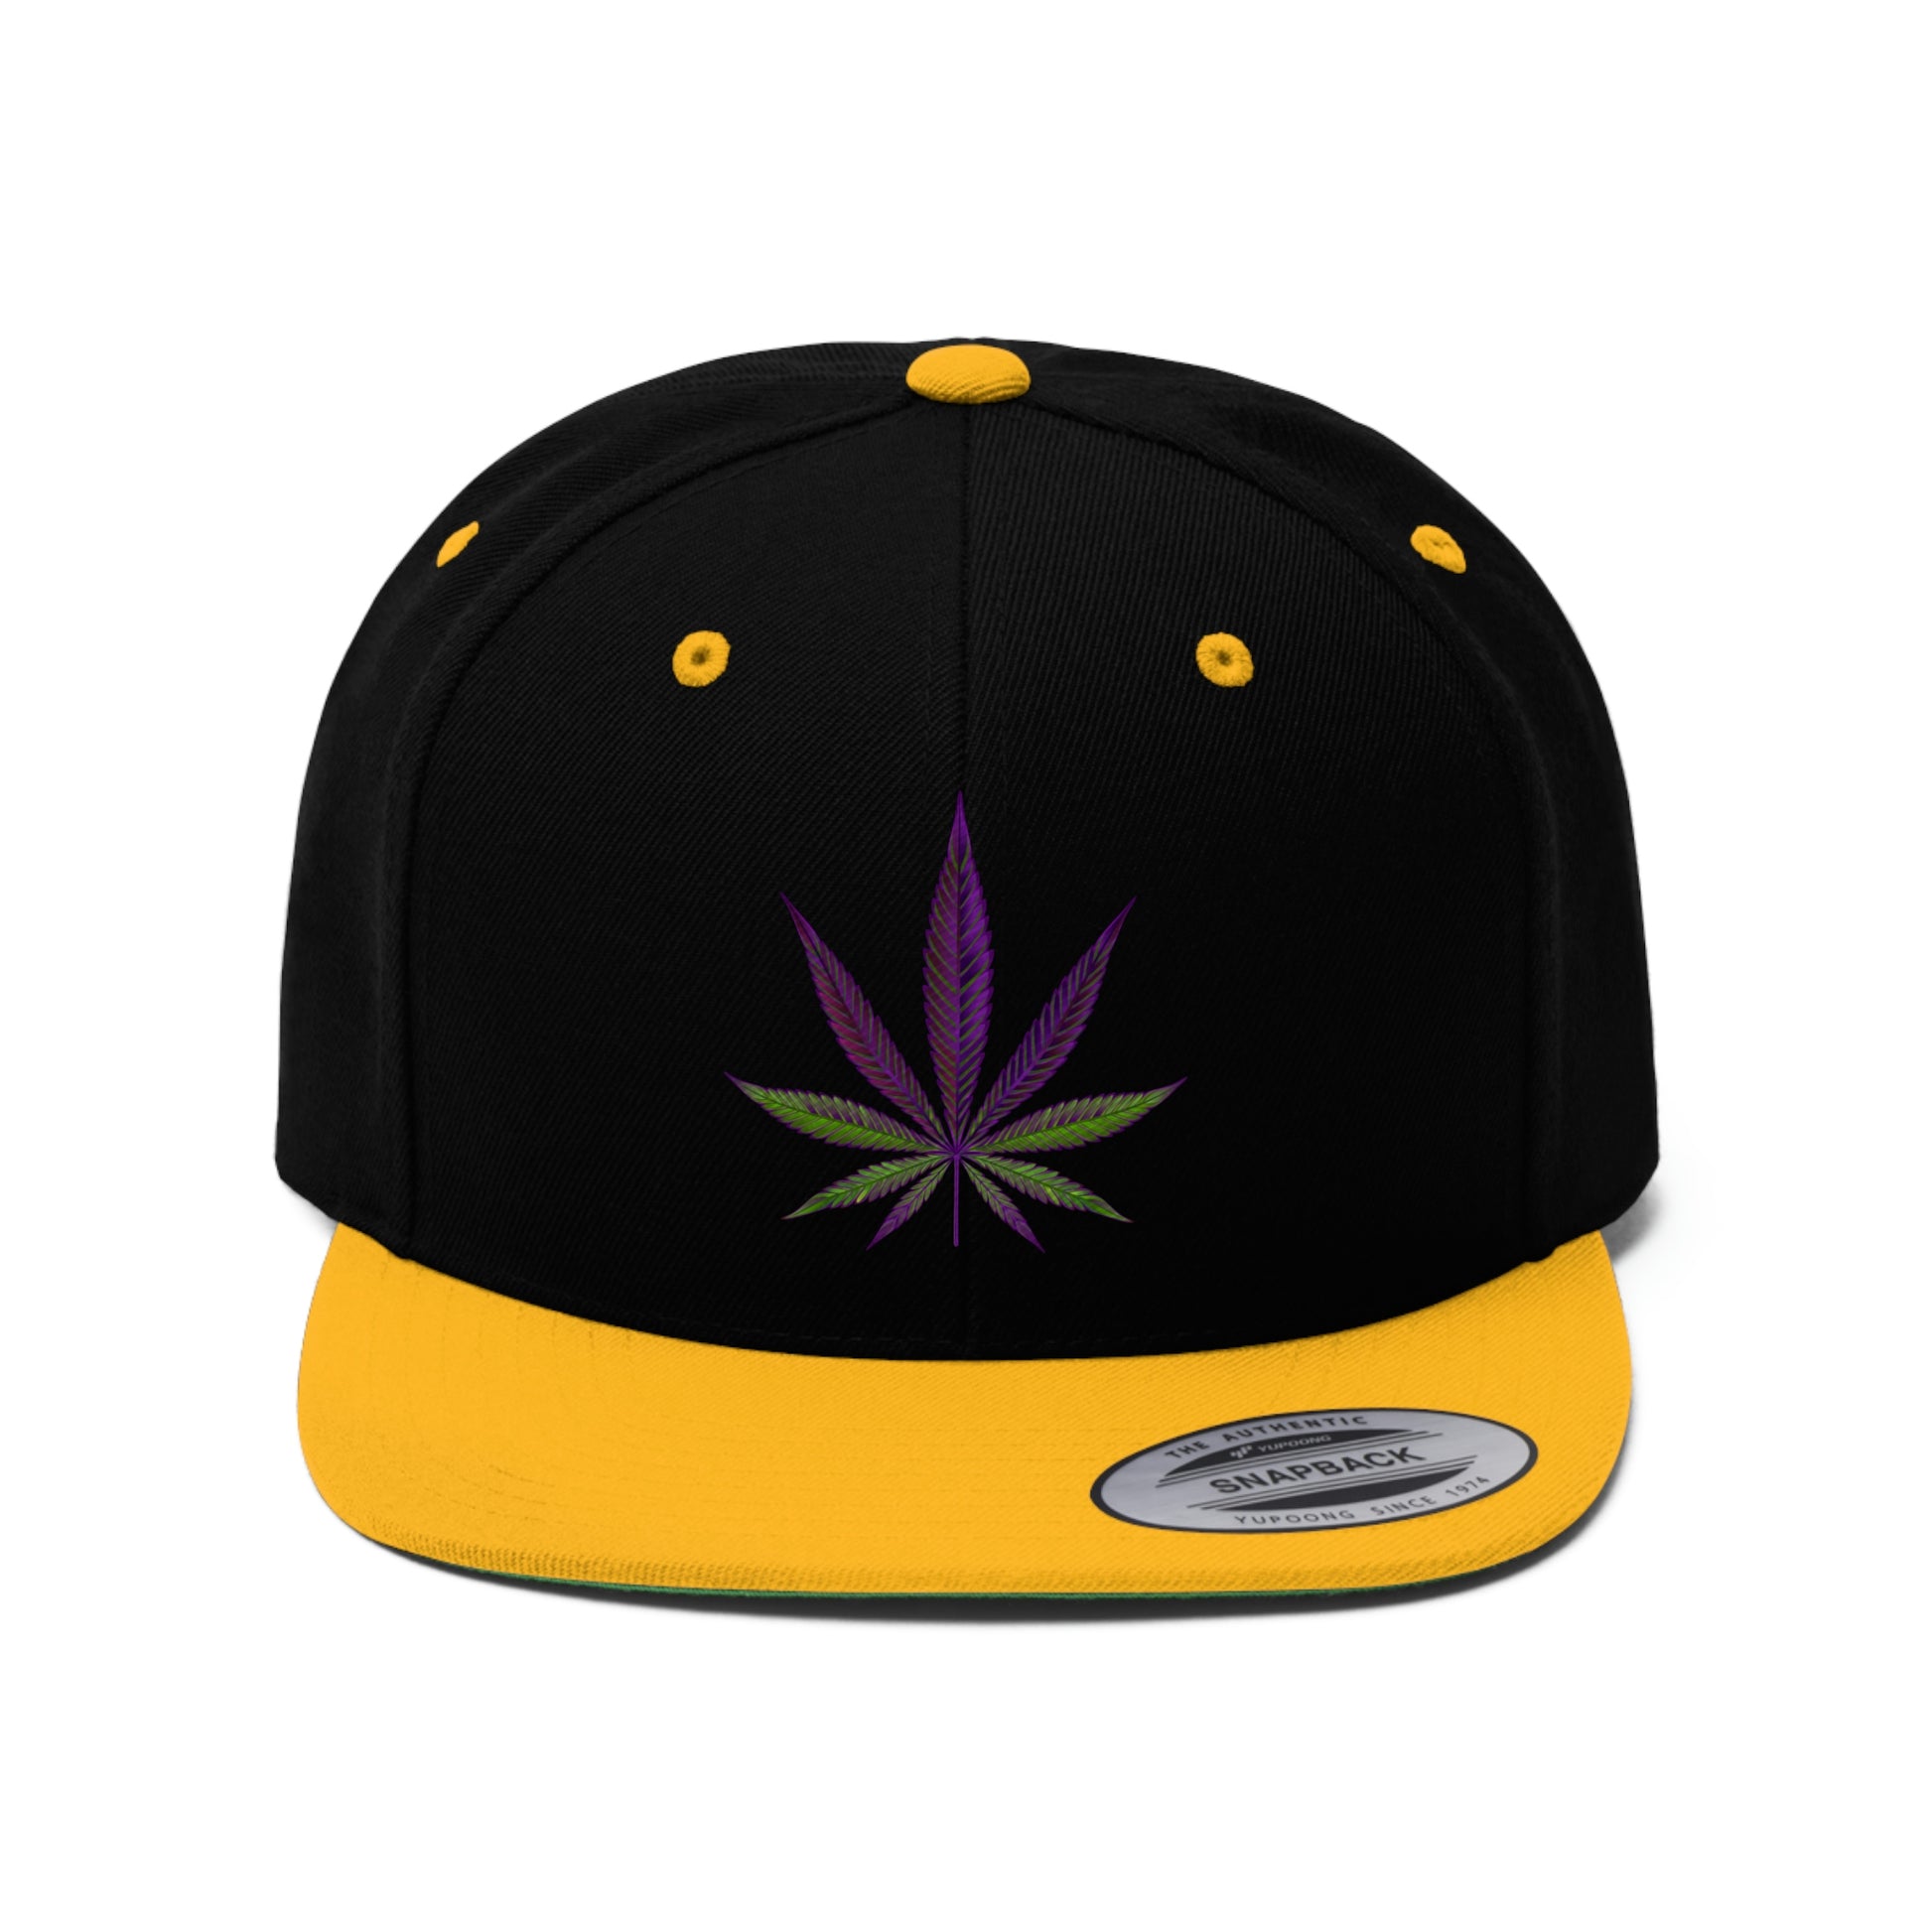 Close up of a gold and black Purple Marijuana Leaf Snapback hat with the leaf located in the center